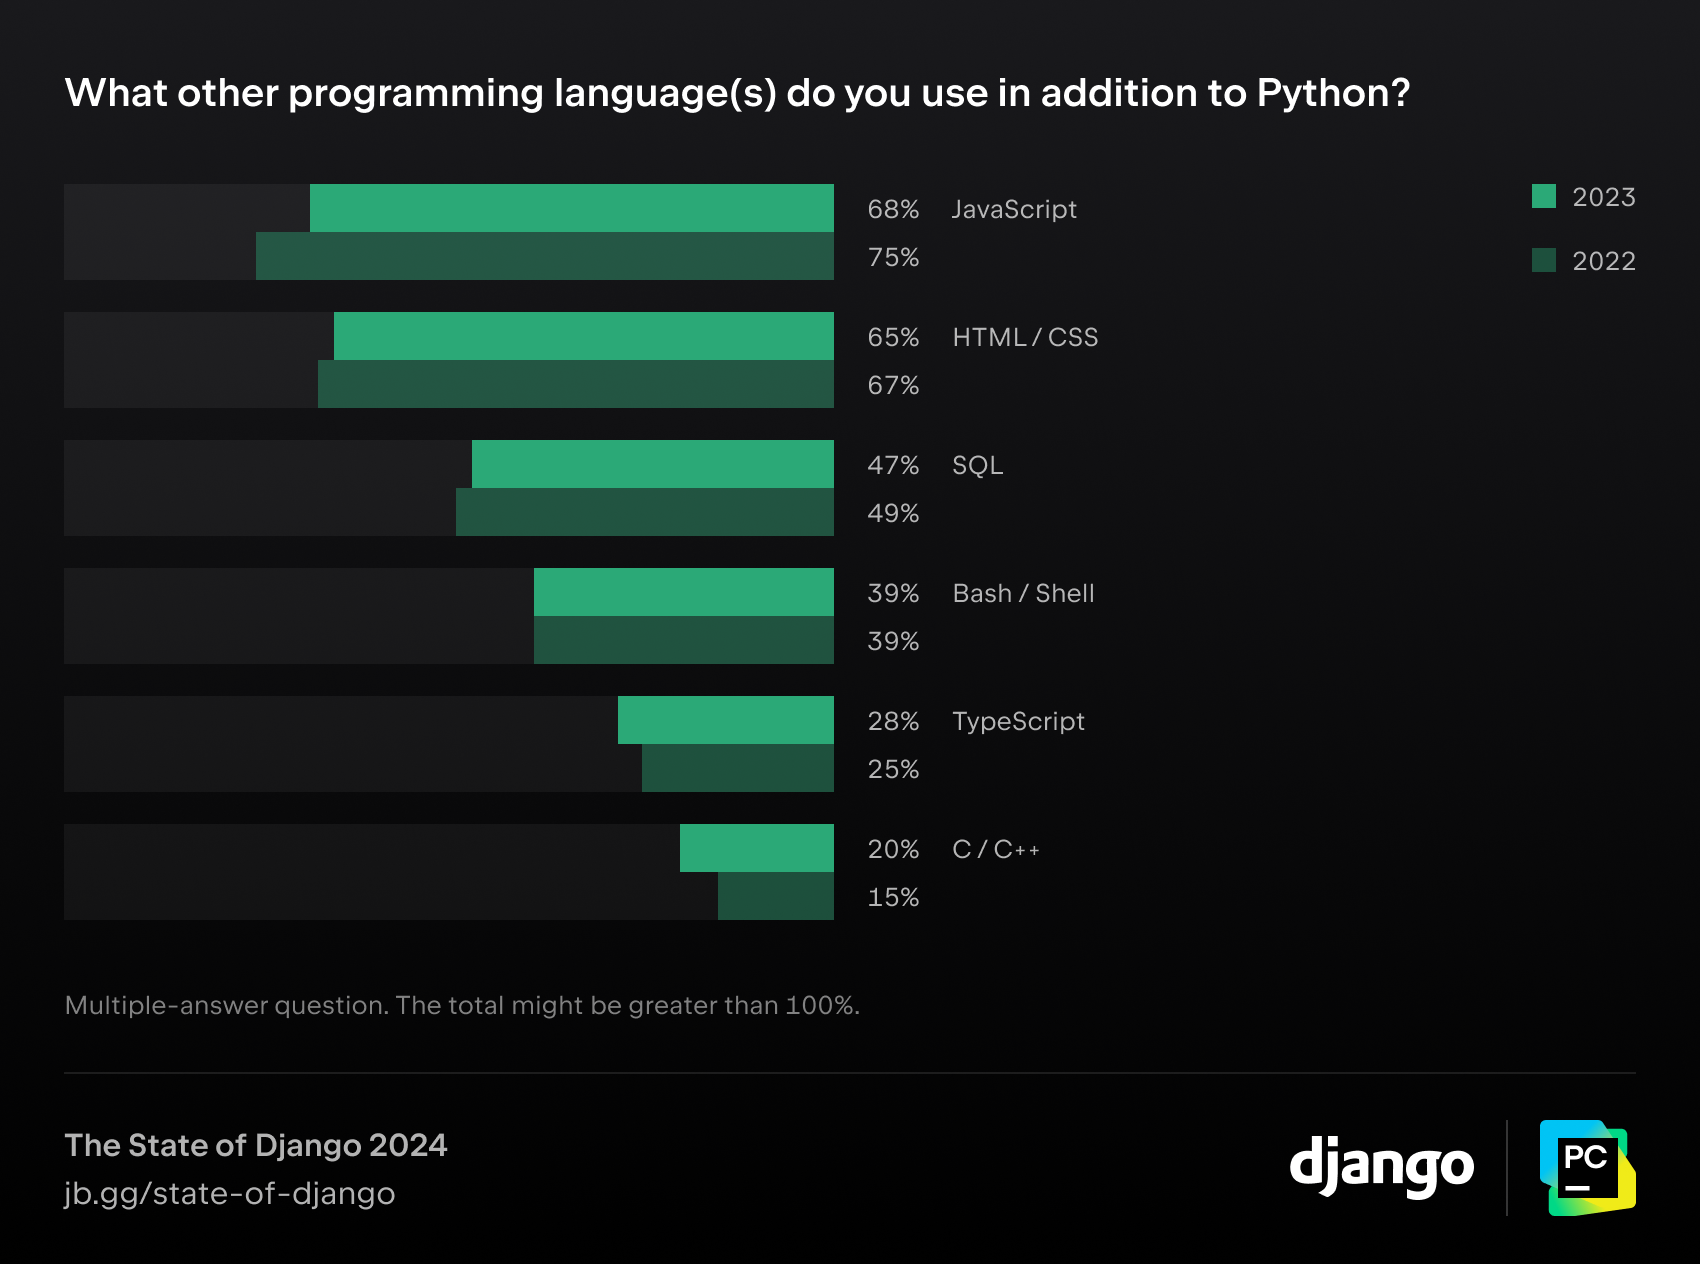 What other programming languages do you use in addition to Python?